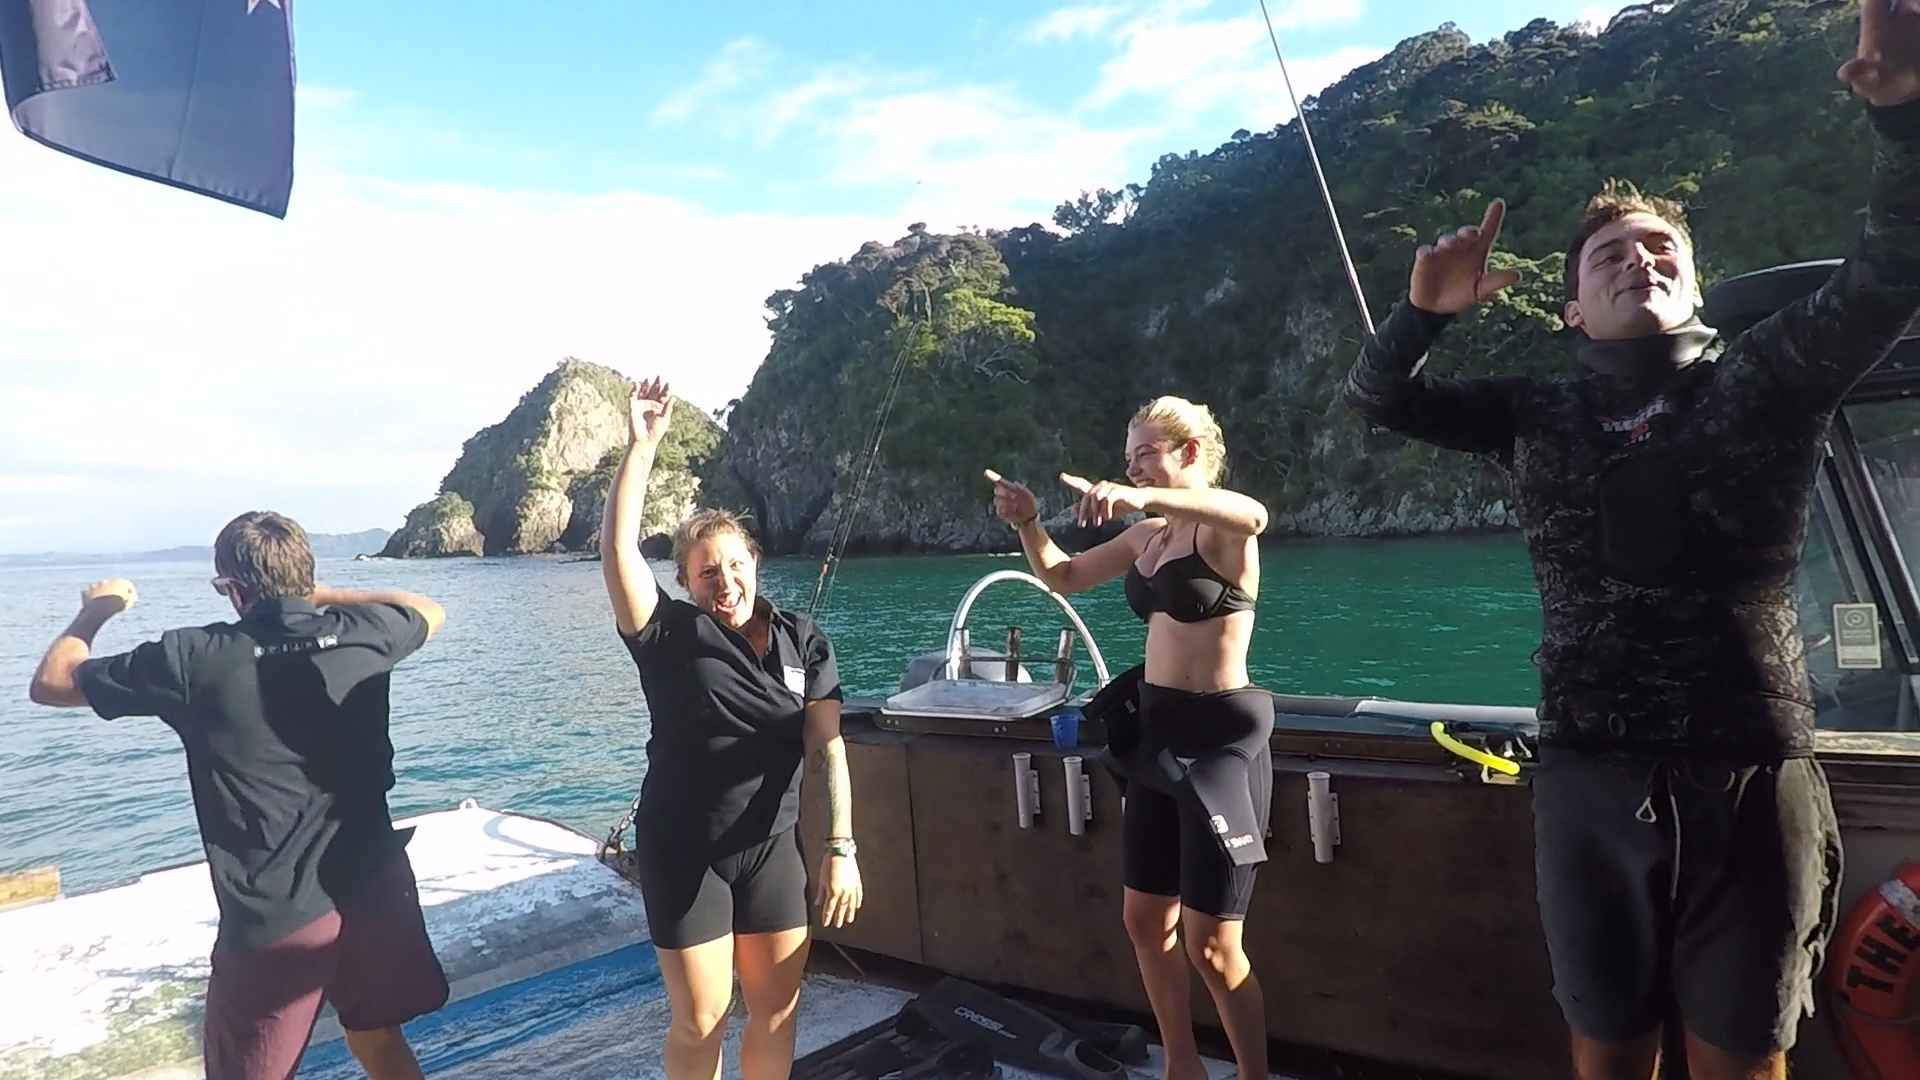 The rock crew having fun while fishing at the Bay of Islands